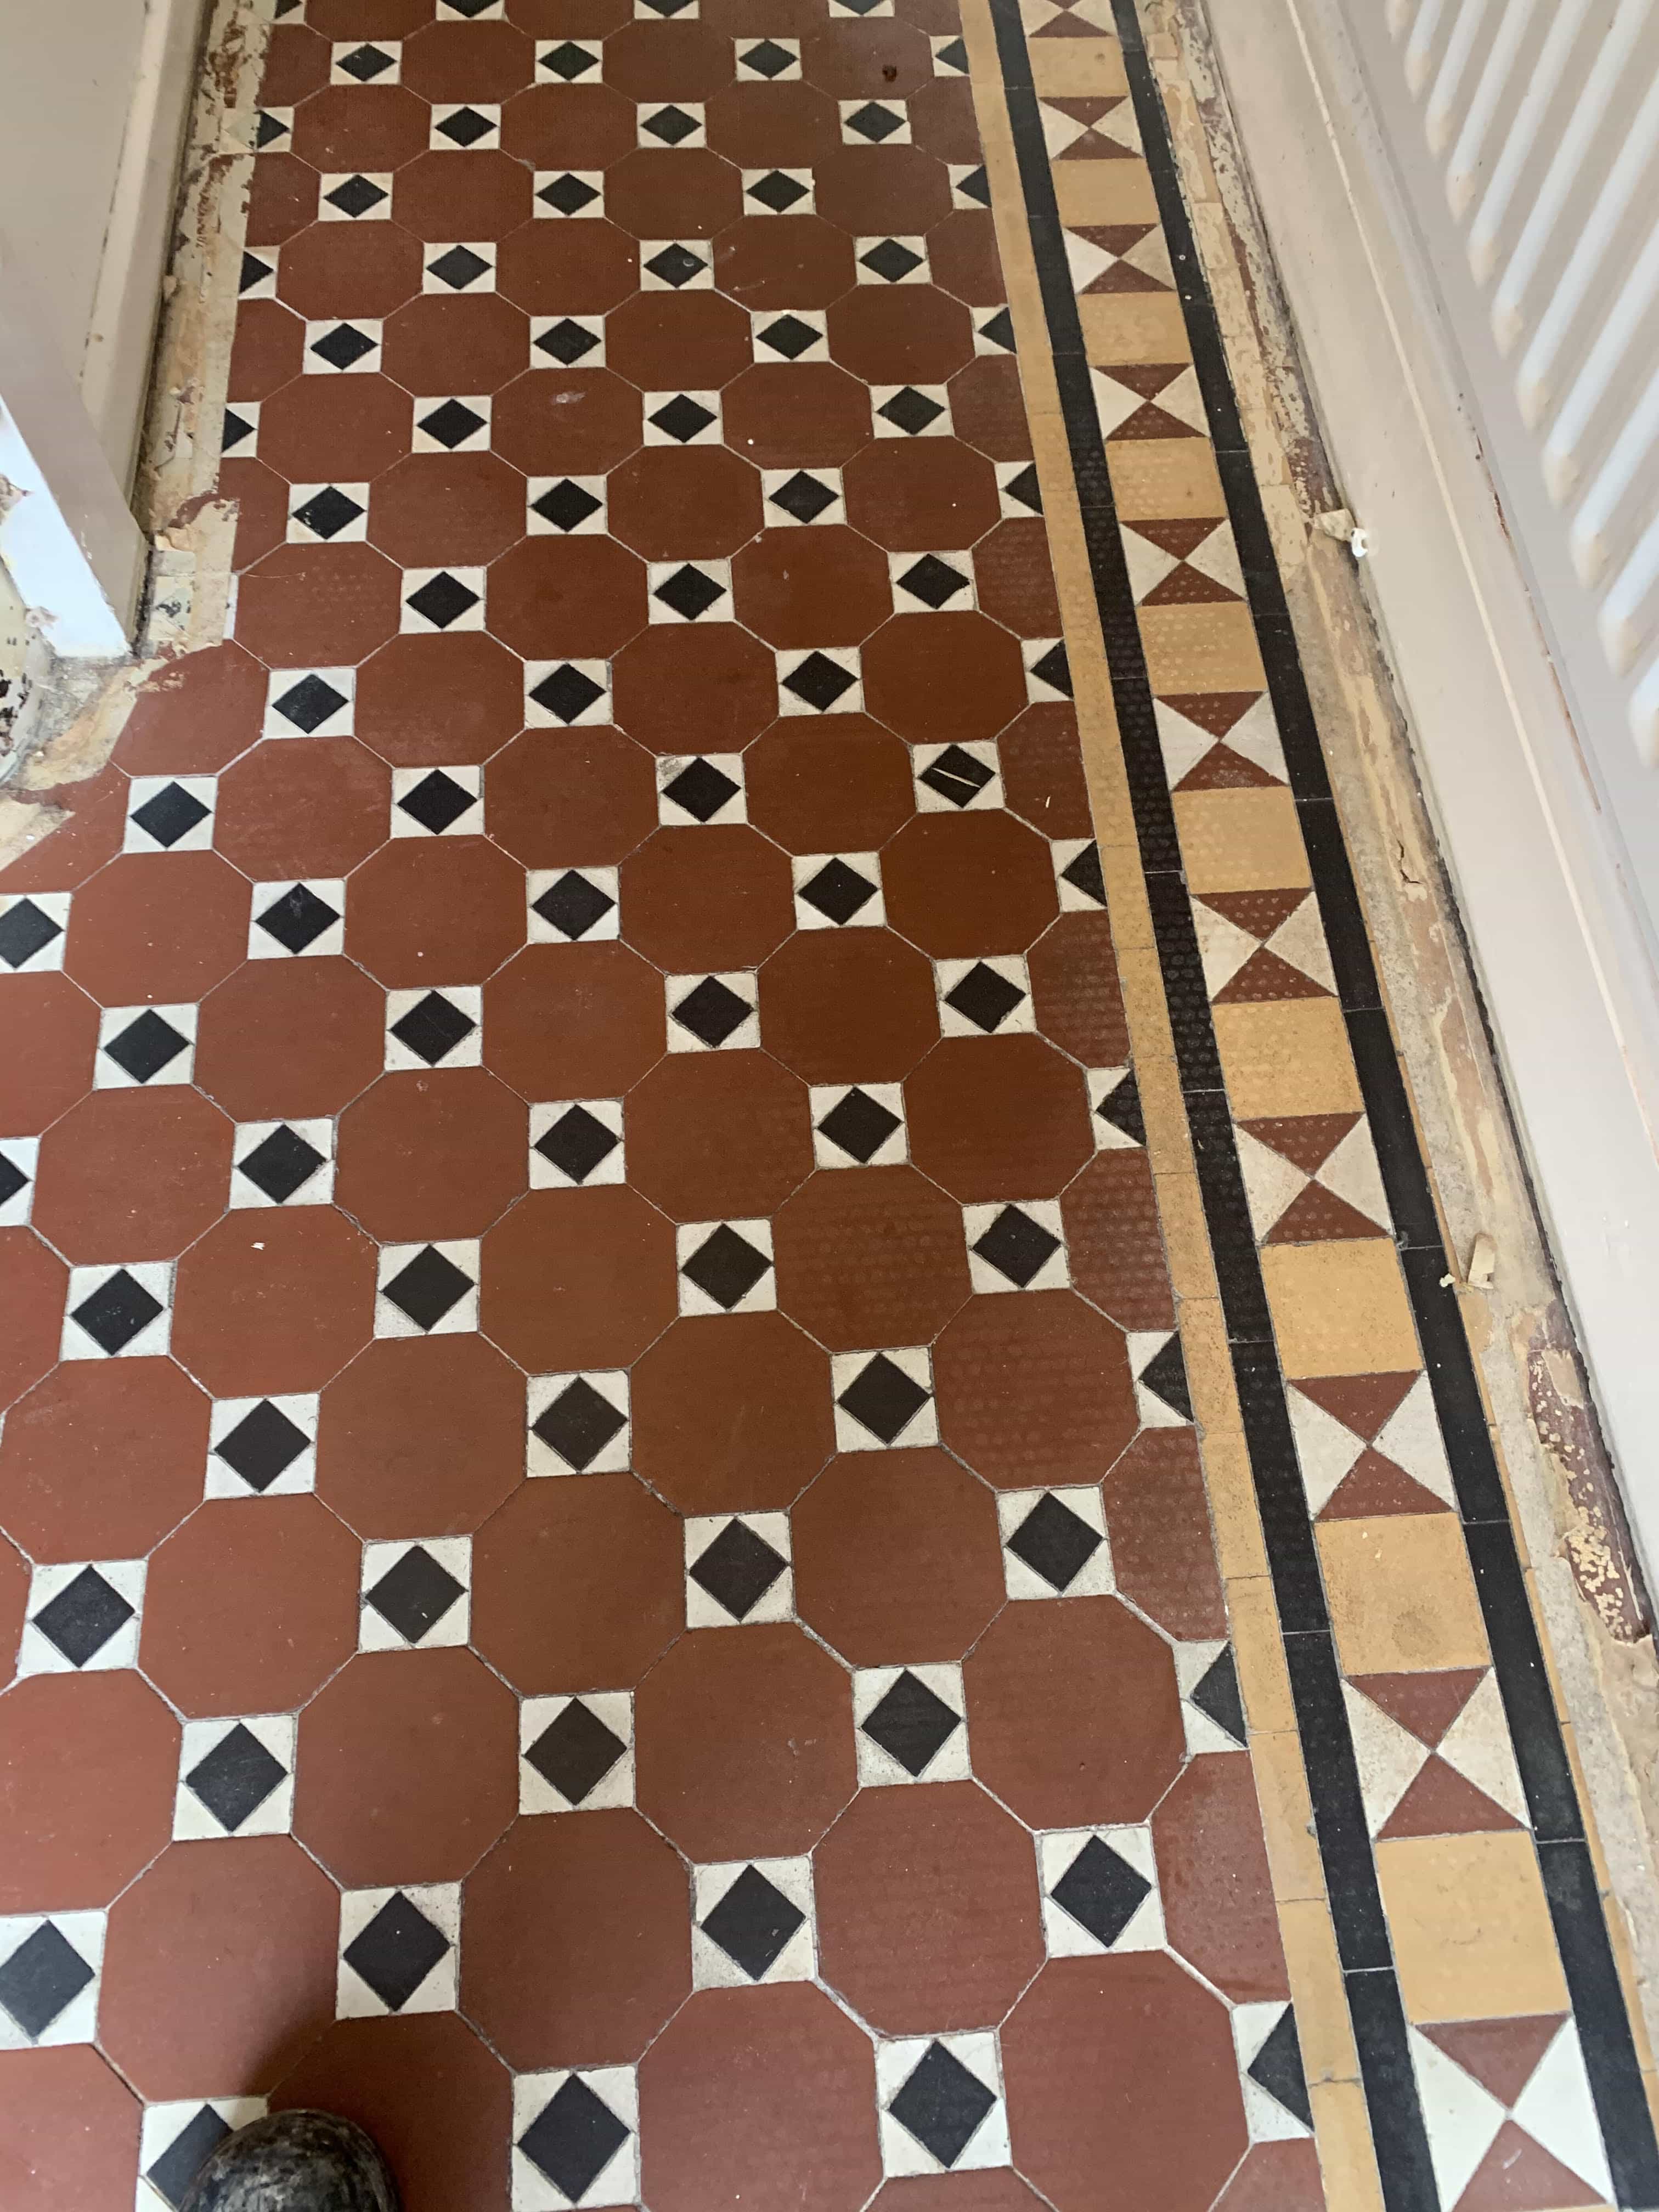 Edwardian Floor Before Renovation Coundon Coventry